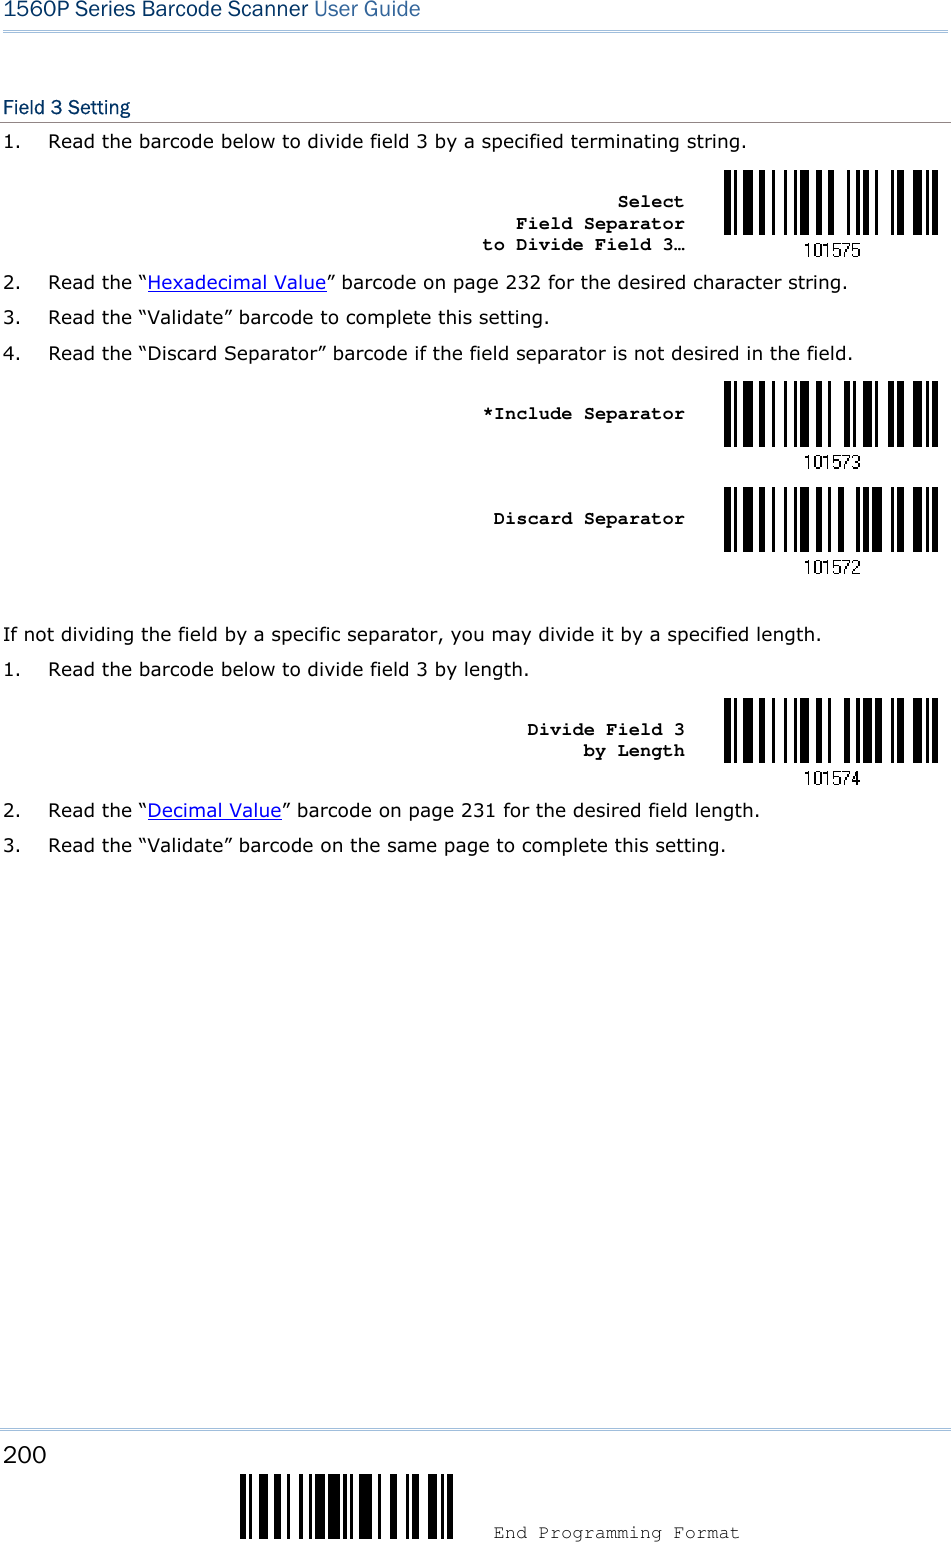 200  End Programming Format 1560P Series Barcode Scanner User Guide Field 3 Setting 1. Read the barcode below to divide field 3 by a specified terminating string.Select Field Separator to Divide Field 3… 2. Read the “Hexadecimal Value” barcode on page 232 for the desired character string.3. Read the “Validate” barcode to complete this setting.4. Read the “Discard Separator” barcode if the field separator is not desired in the field.*Include SeparatorDiscard Separator If not dividing the field by a specific separator, you may divide it by a specified length. 1. Read the barcode below to divide field 3 by length.Divide Field 3 by Length 2. Read the “Decimal Value” barcode on page 231 for the desired field length.3. Read the “Validate” barcode on the same page to complete this setting.